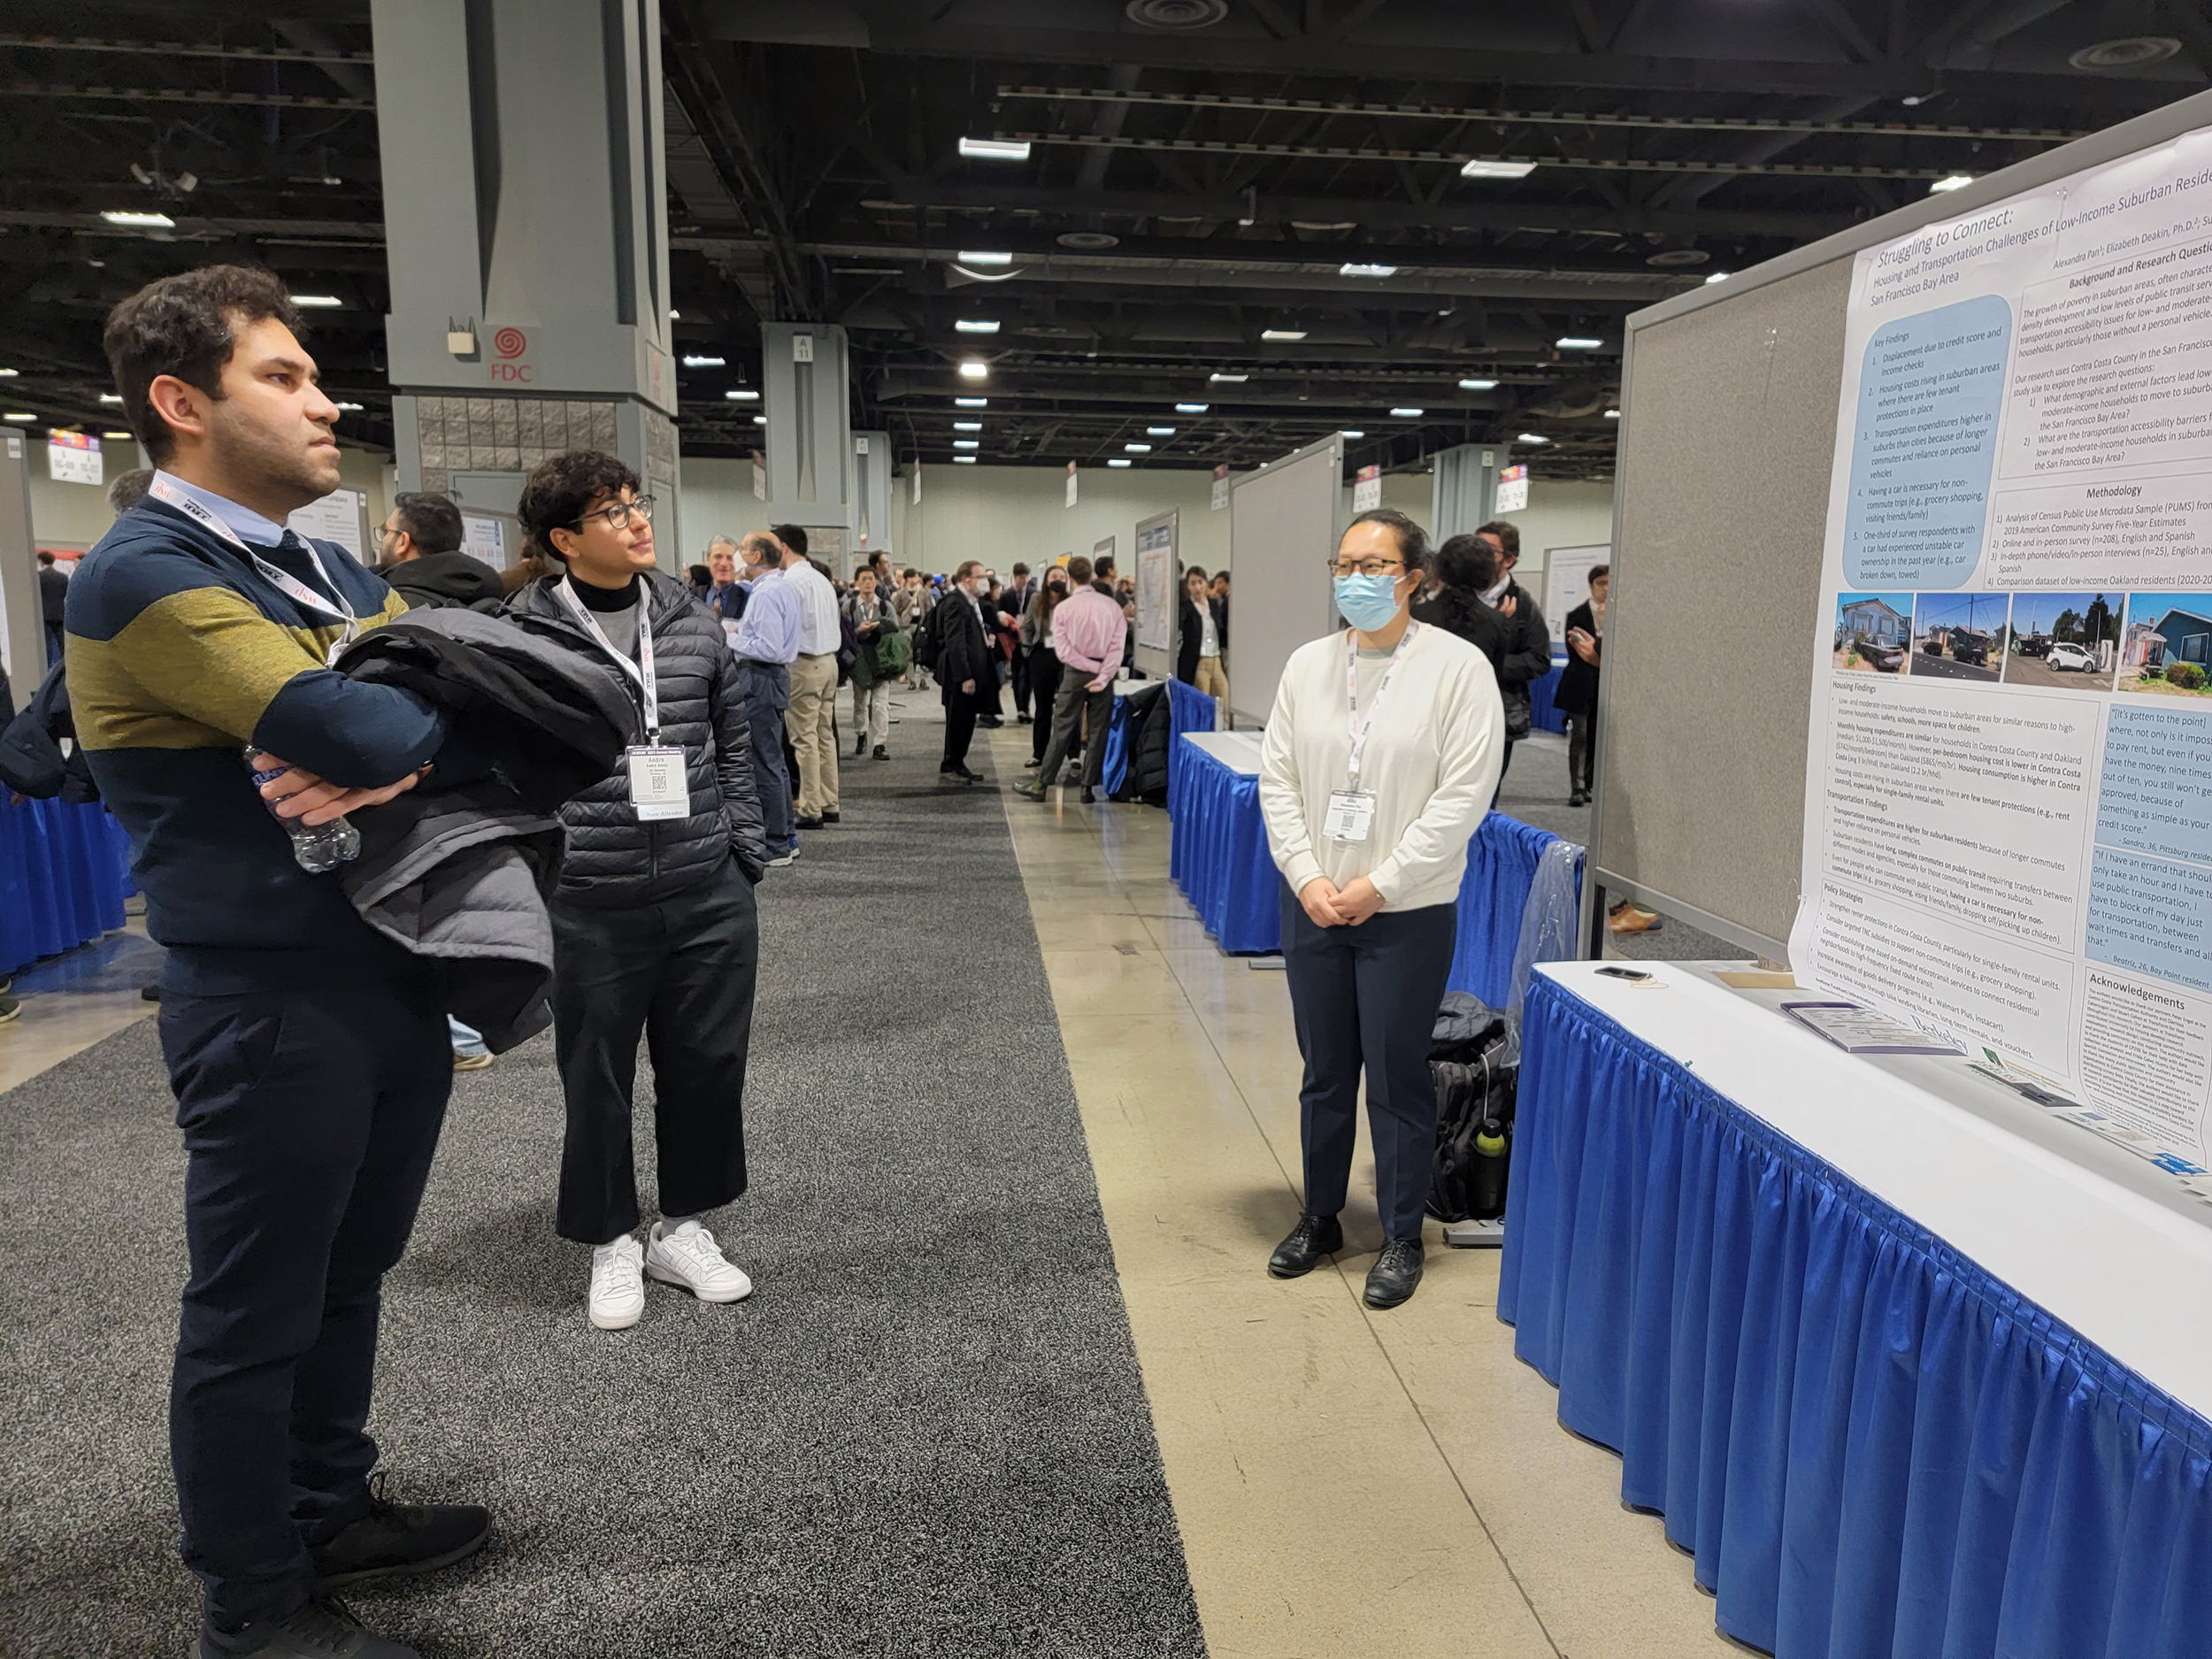 CEE doctoral student Alex Pan talks to DCRP MCP student Andre Soucy about her research on Struggling to Connect: Housing and Transportation Challenges of Low- and Moderate-Income Suburban Residents in the San Francisco Bay Area